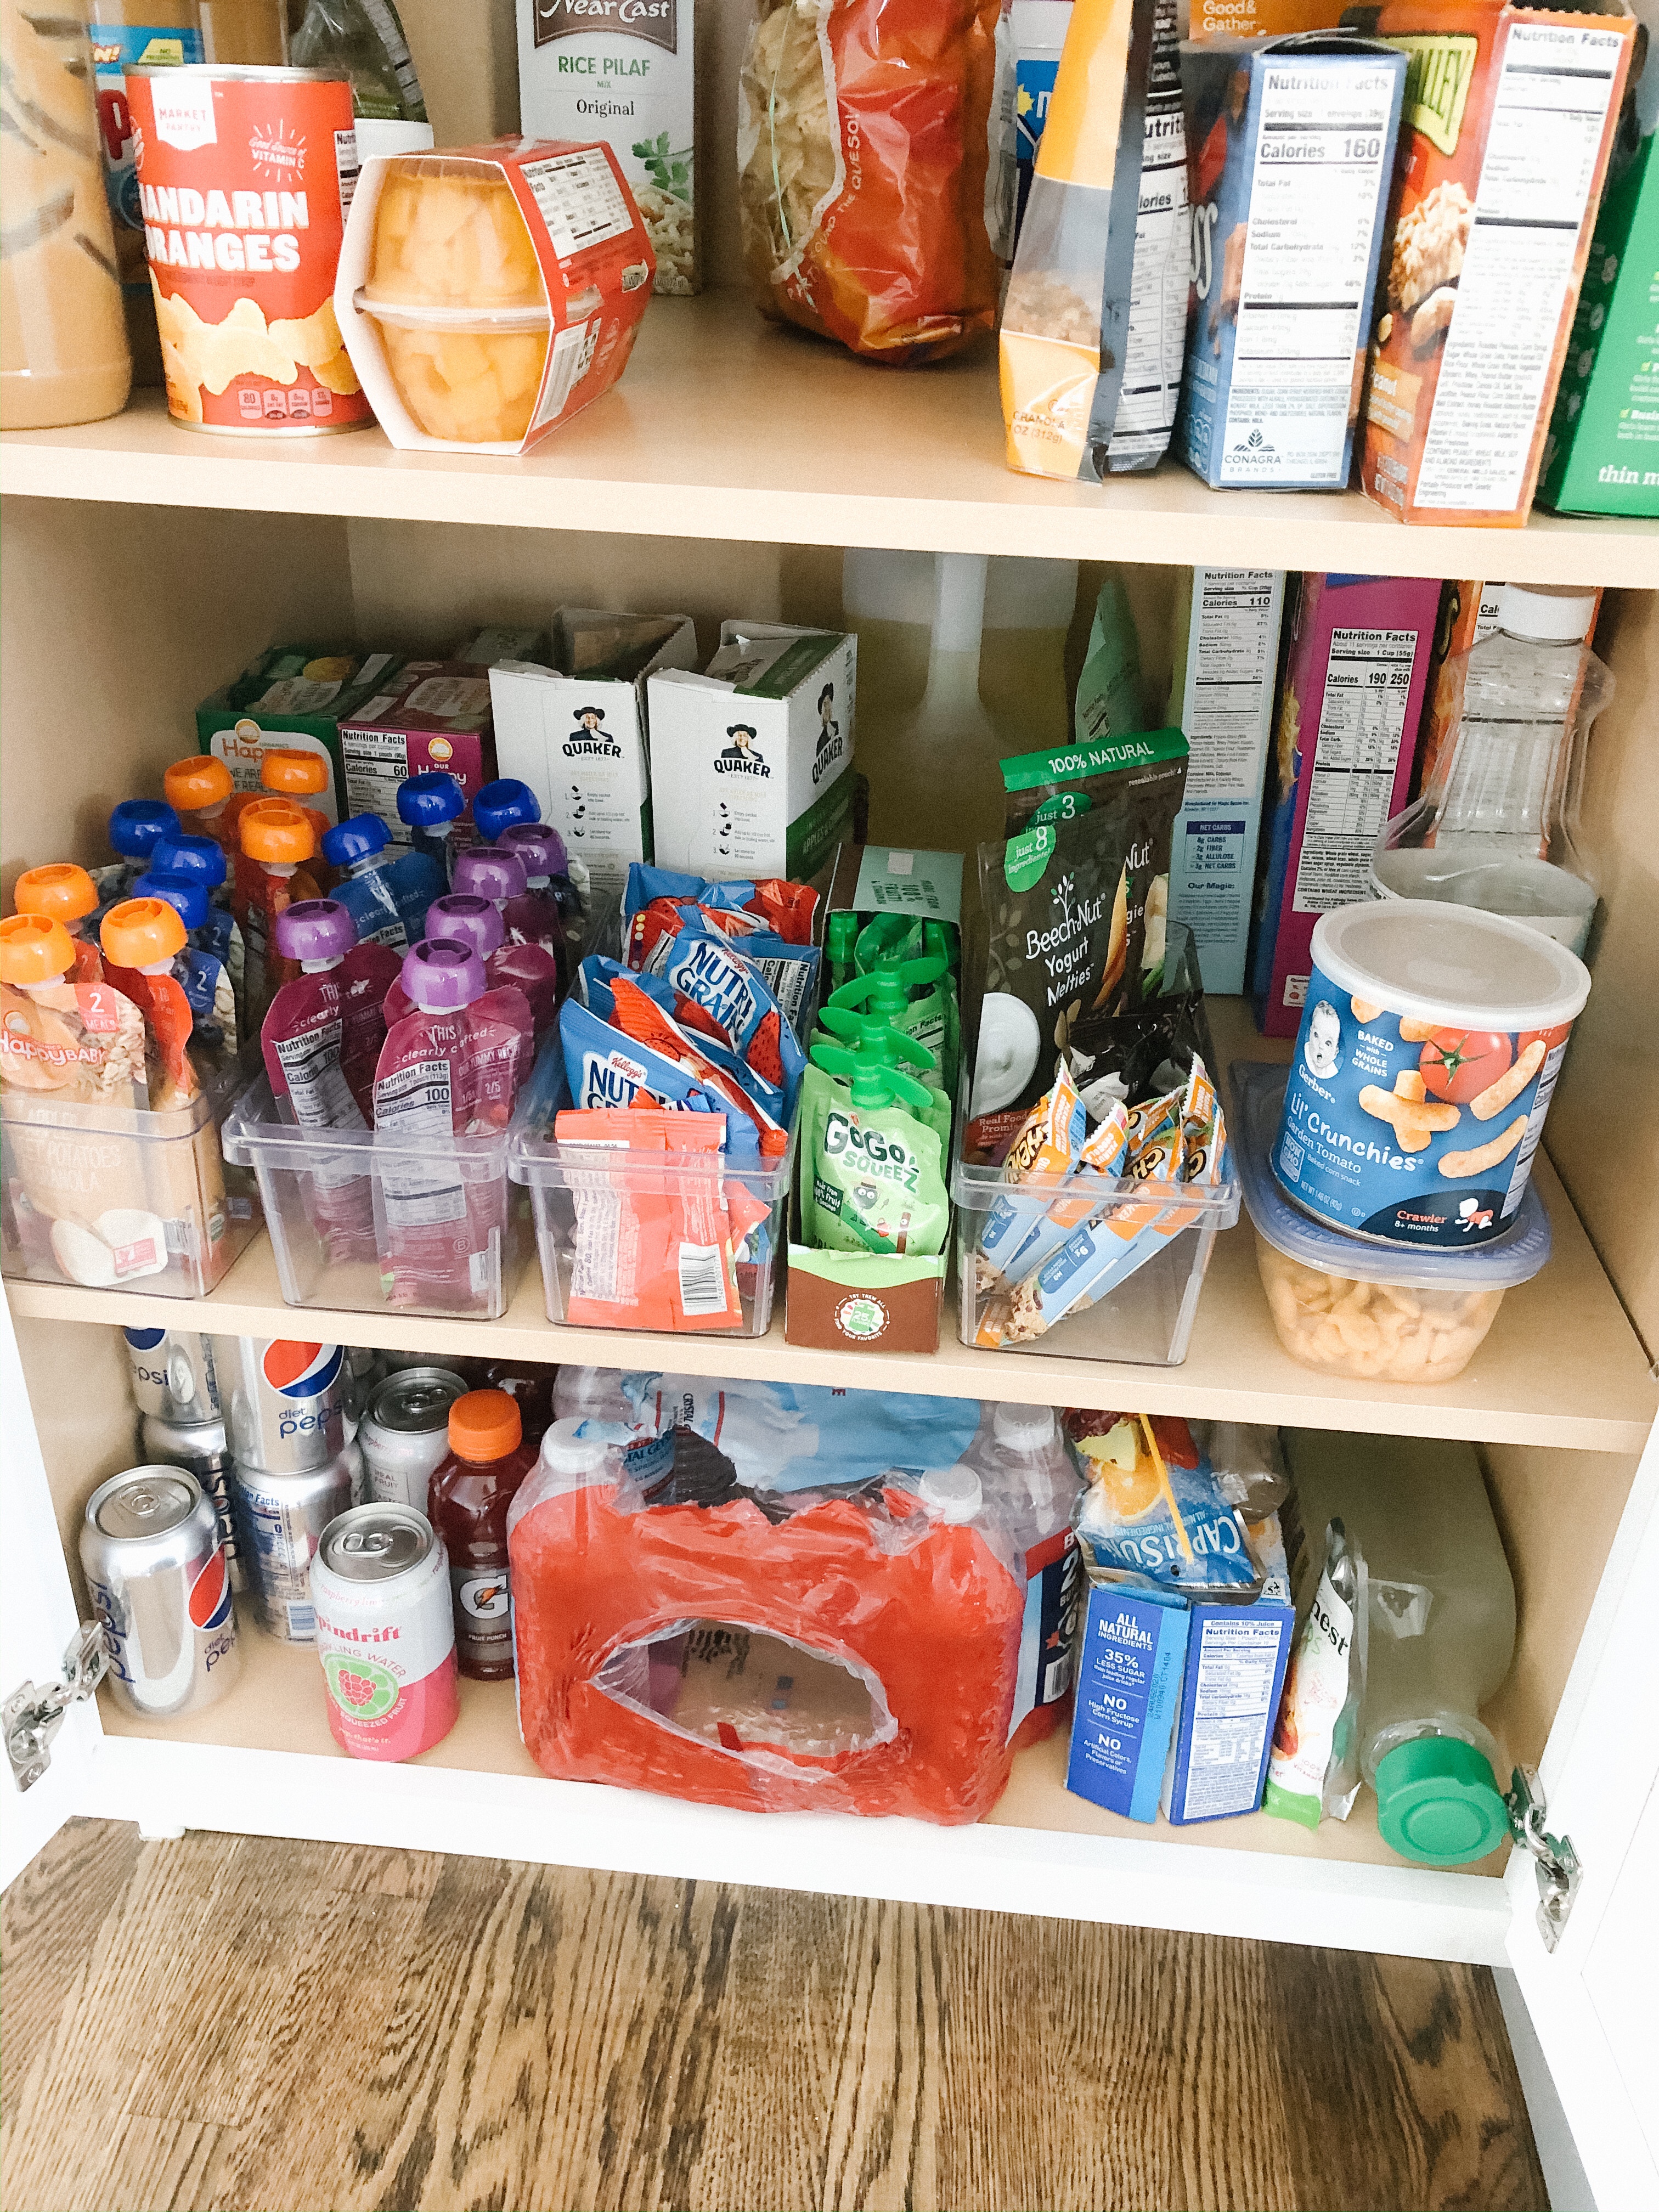 Kitchen Organization - The Chronicles of Home - Organize Snacks